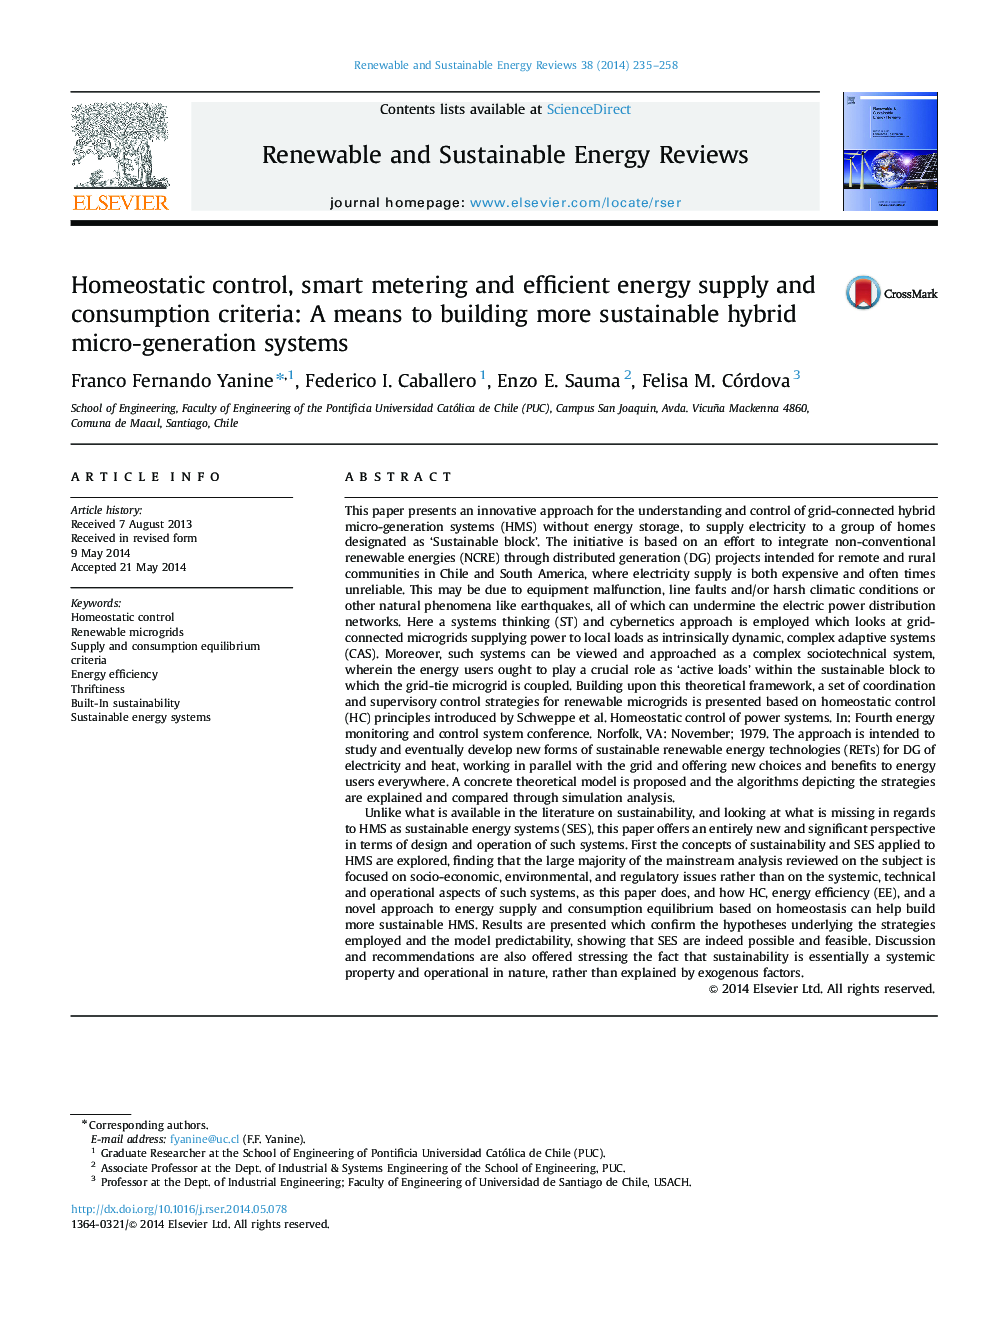 Homeostatic control, smart metering and efficient energy supply and consumption criteria: A means to building more sustainable hybrid micro-generation systems